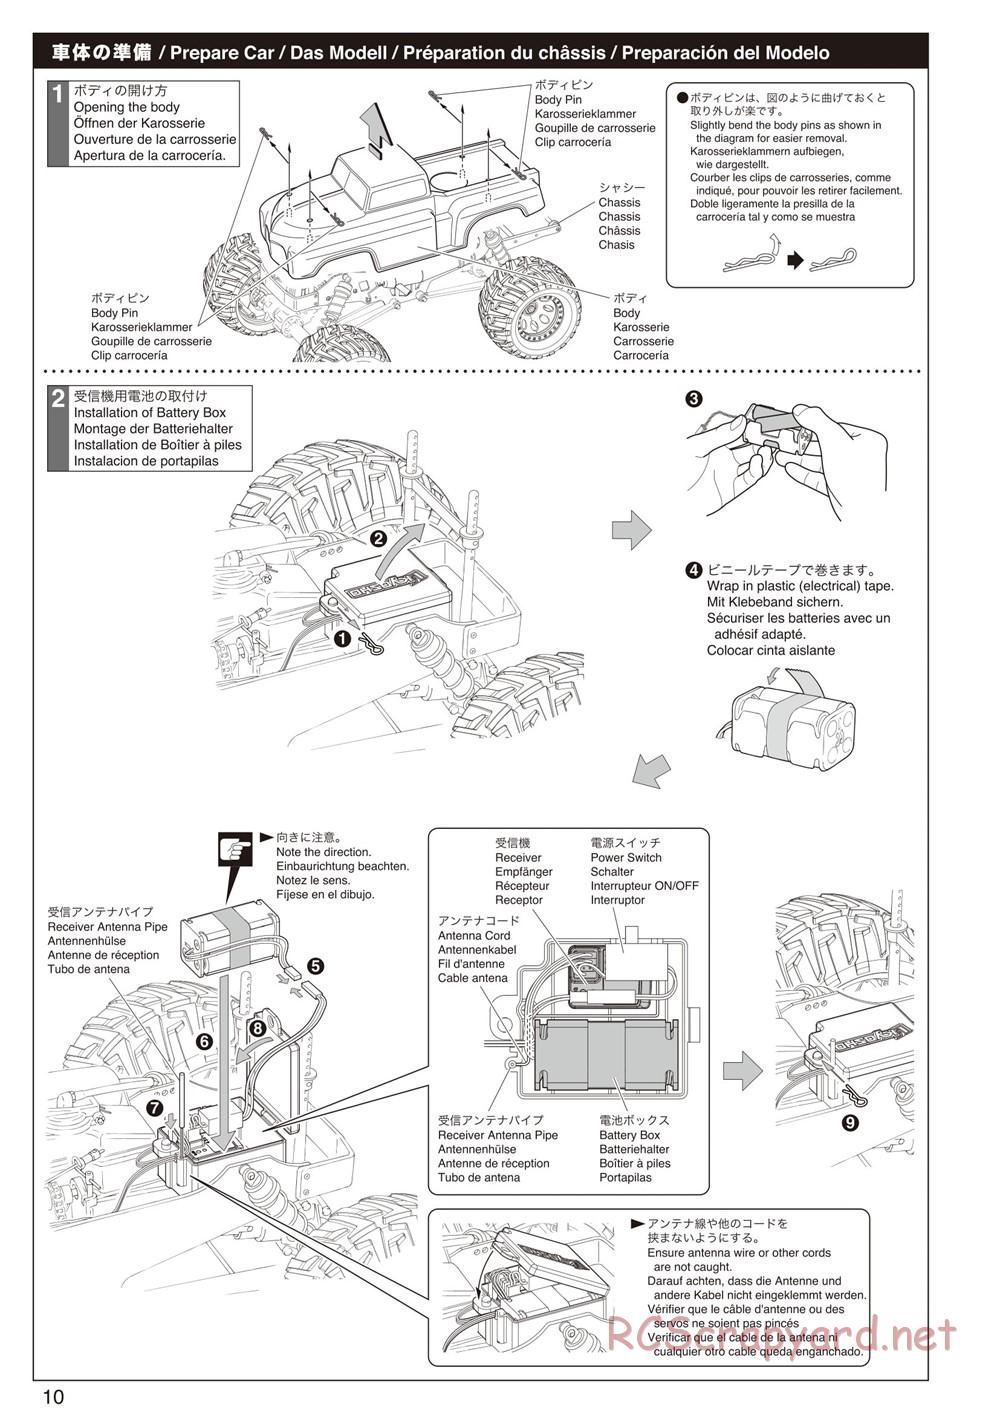 Kyosho - Mad Force Kruiser 2.0 - Manual - Page 10